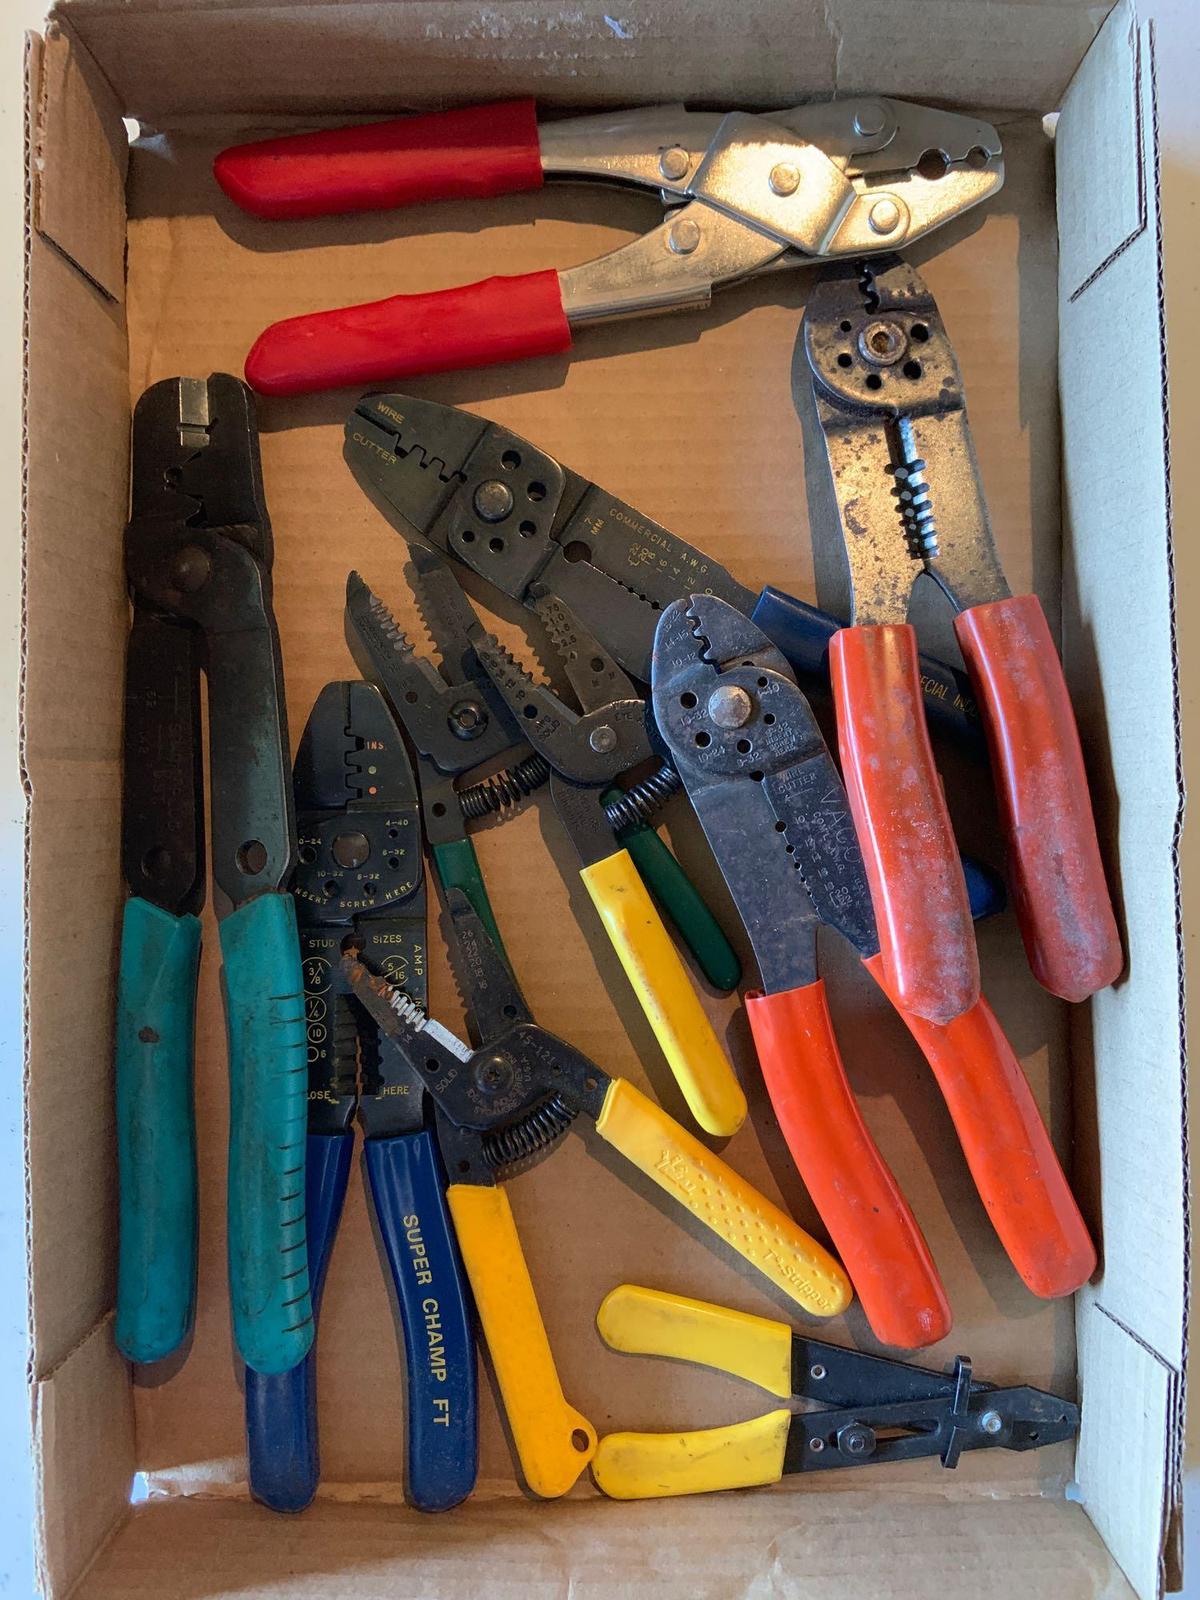 Group of wire strippers and cutters